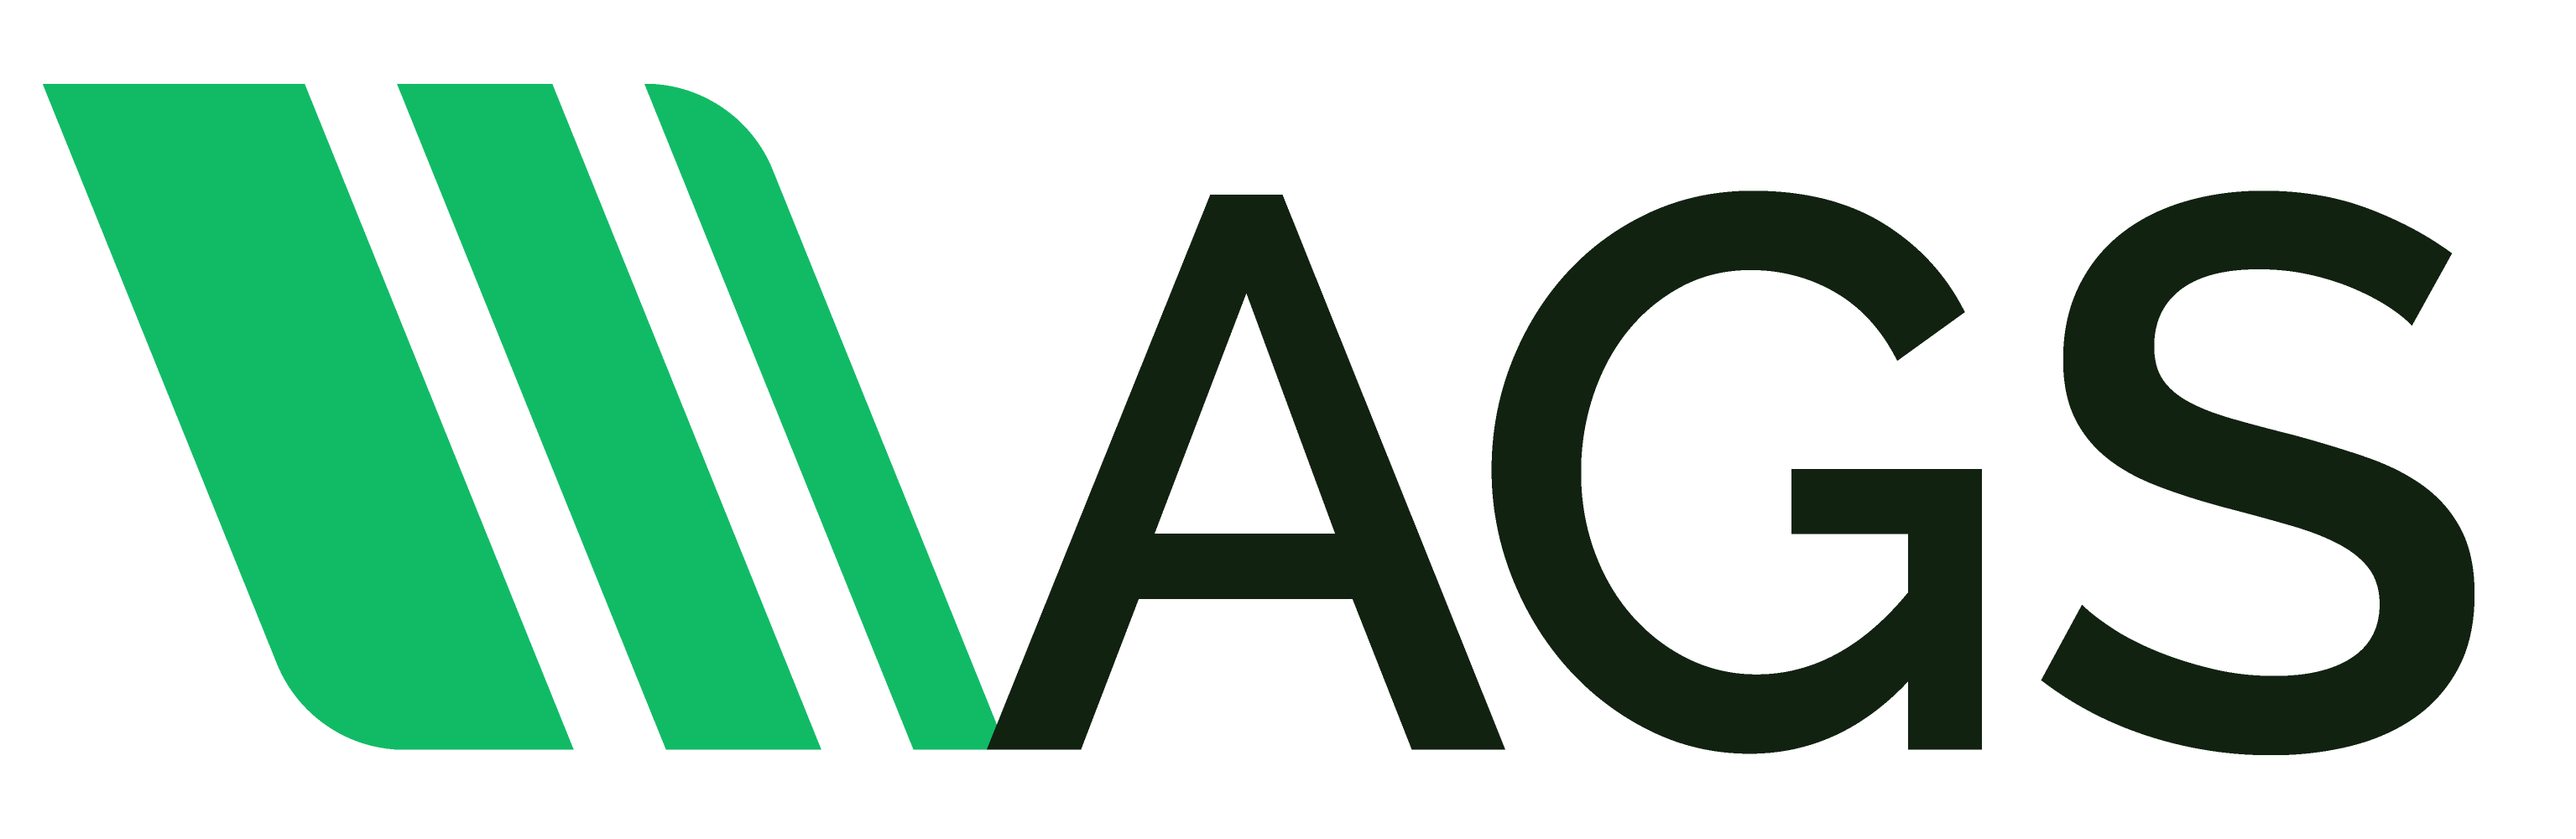 Google Corporate Logo - AGS – Association of Geotechnical and Geoenvironmental Specialists ...